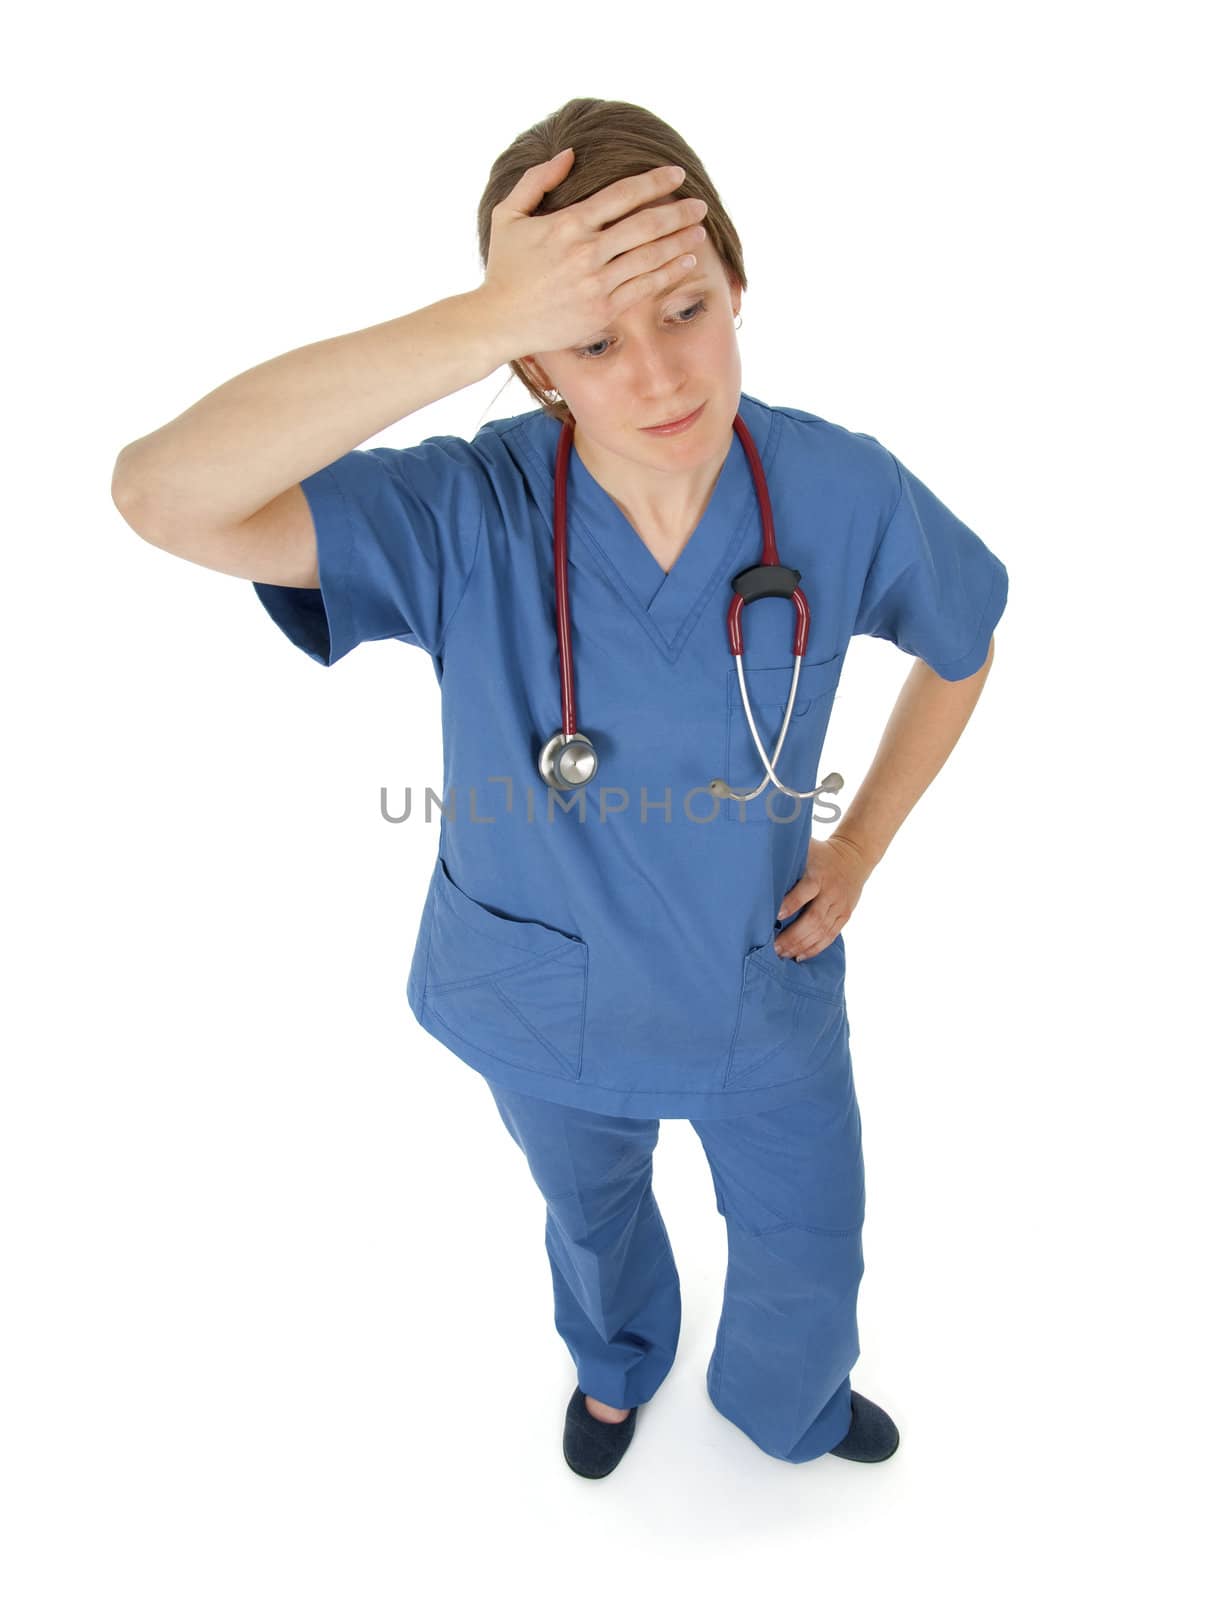 Tired young nurse having headache, isolated on white.